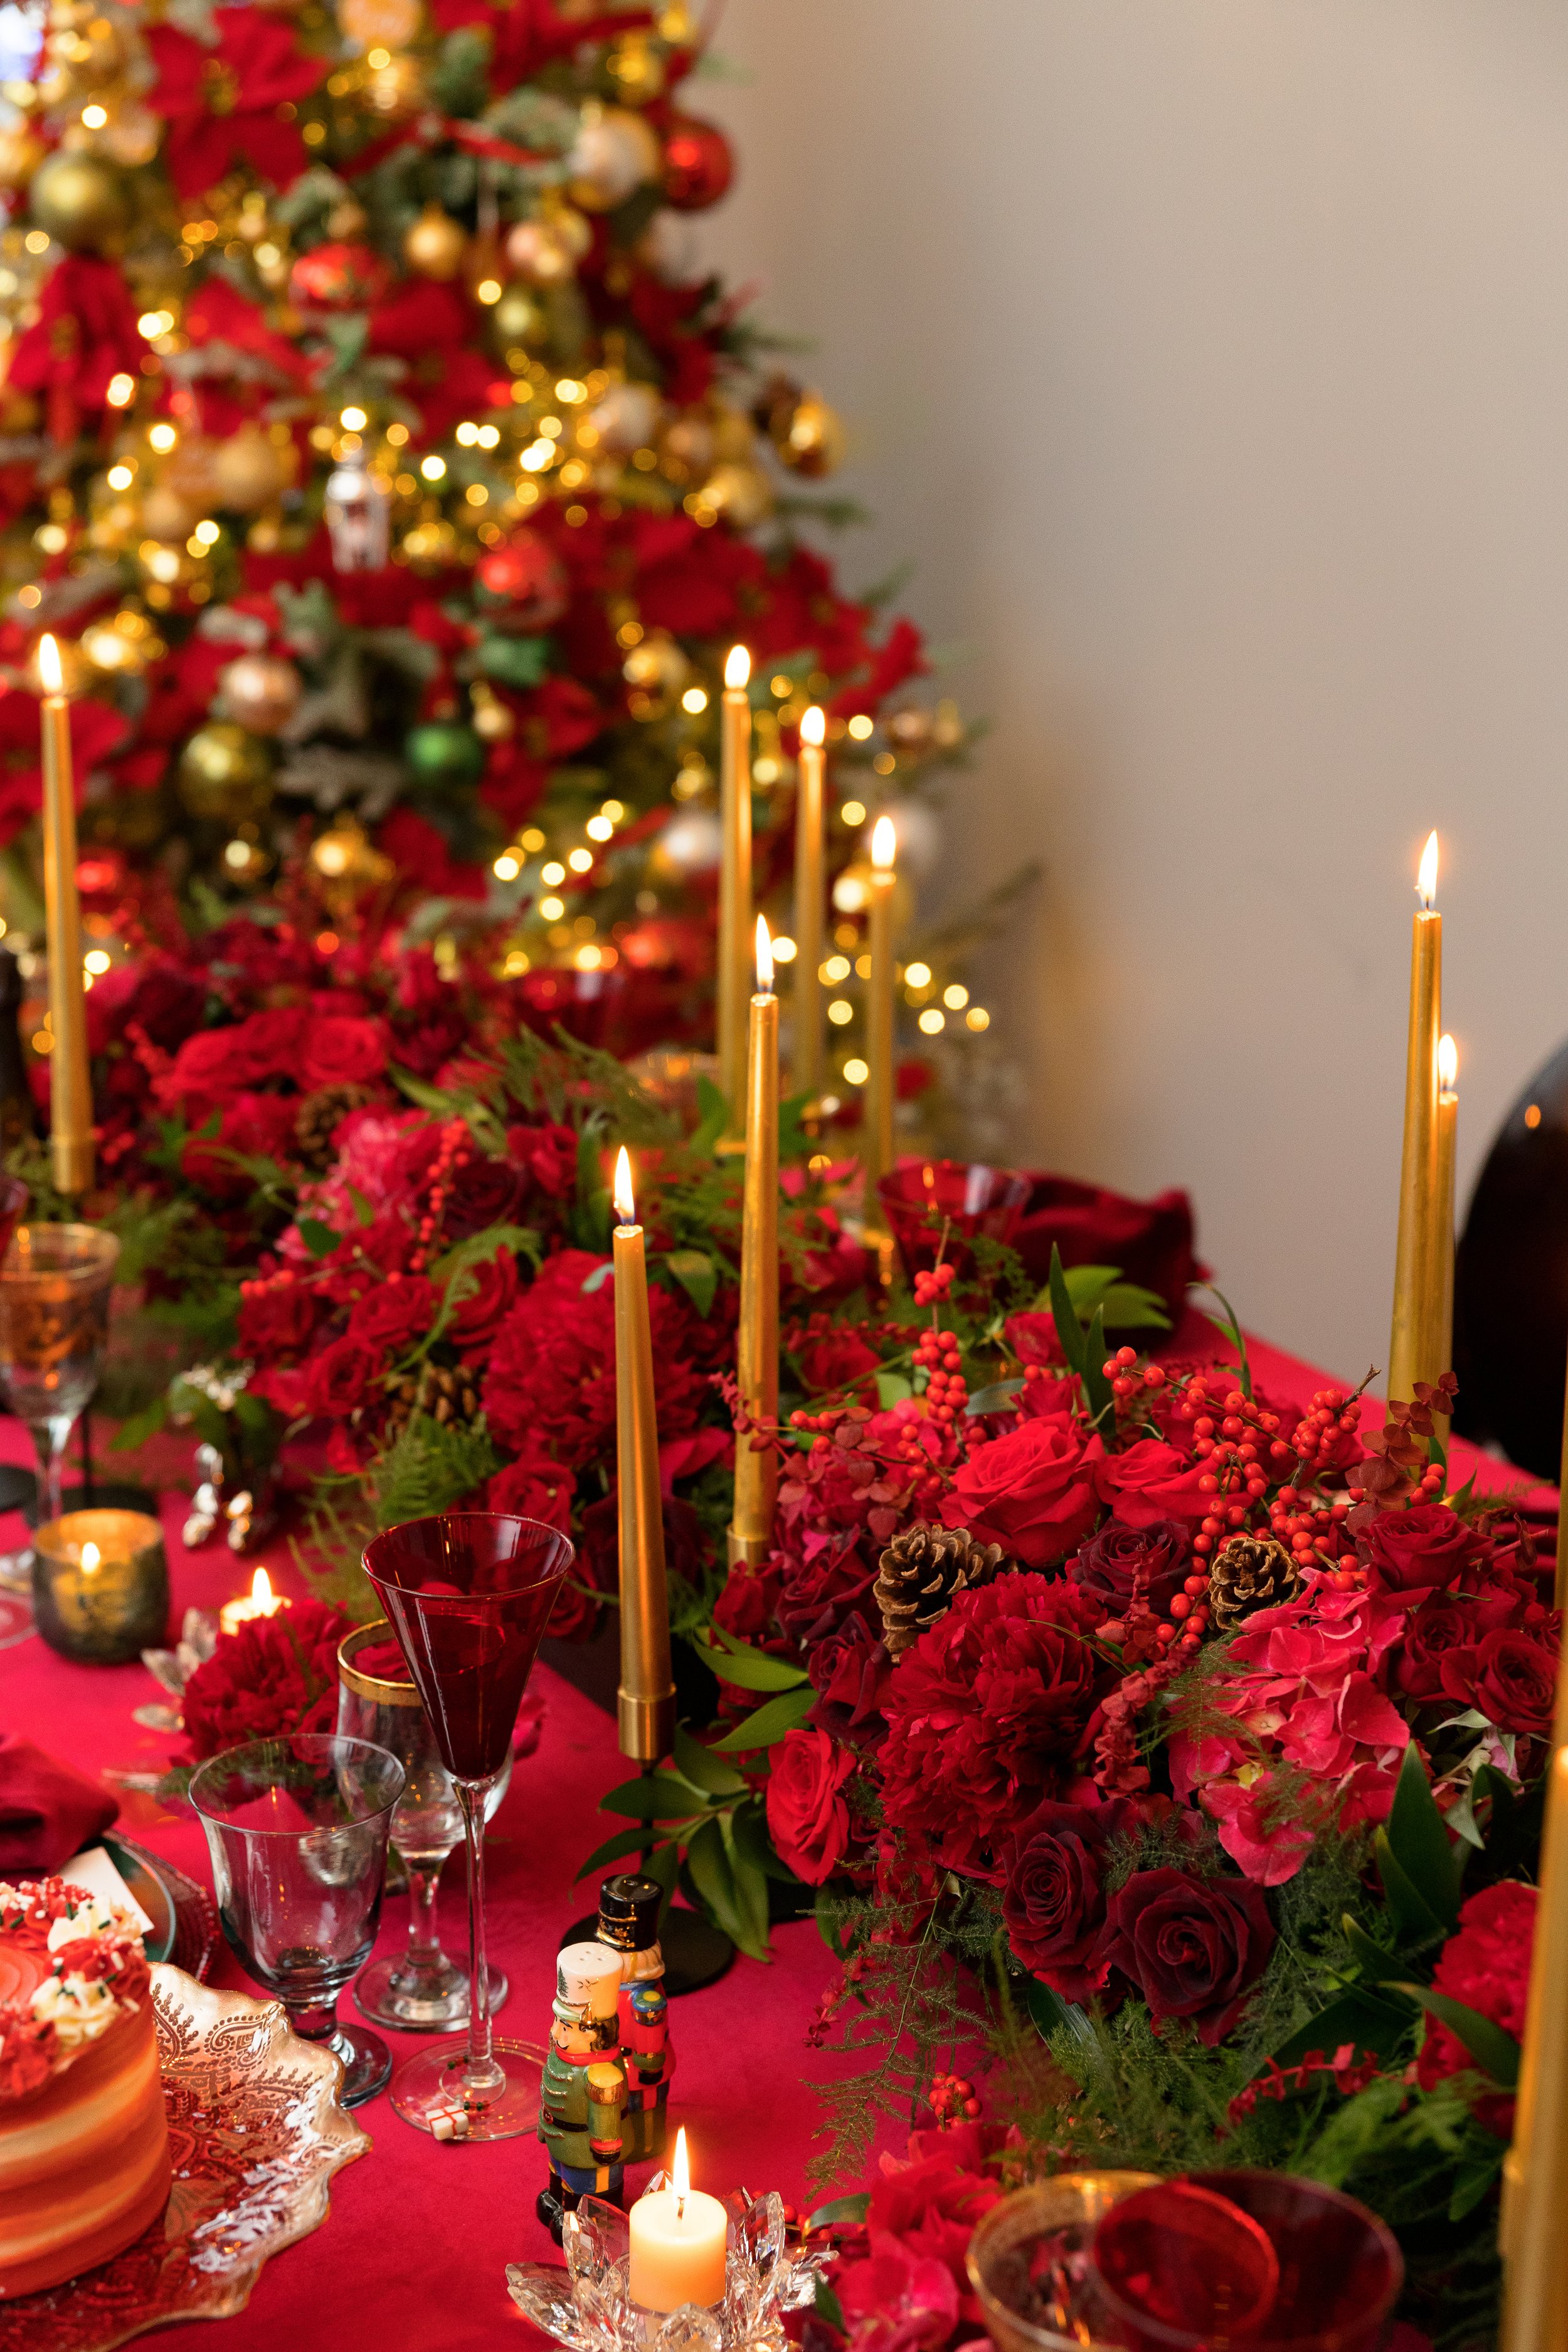 5 Easy Ways to Create a Decadent and Festive Christmas Table